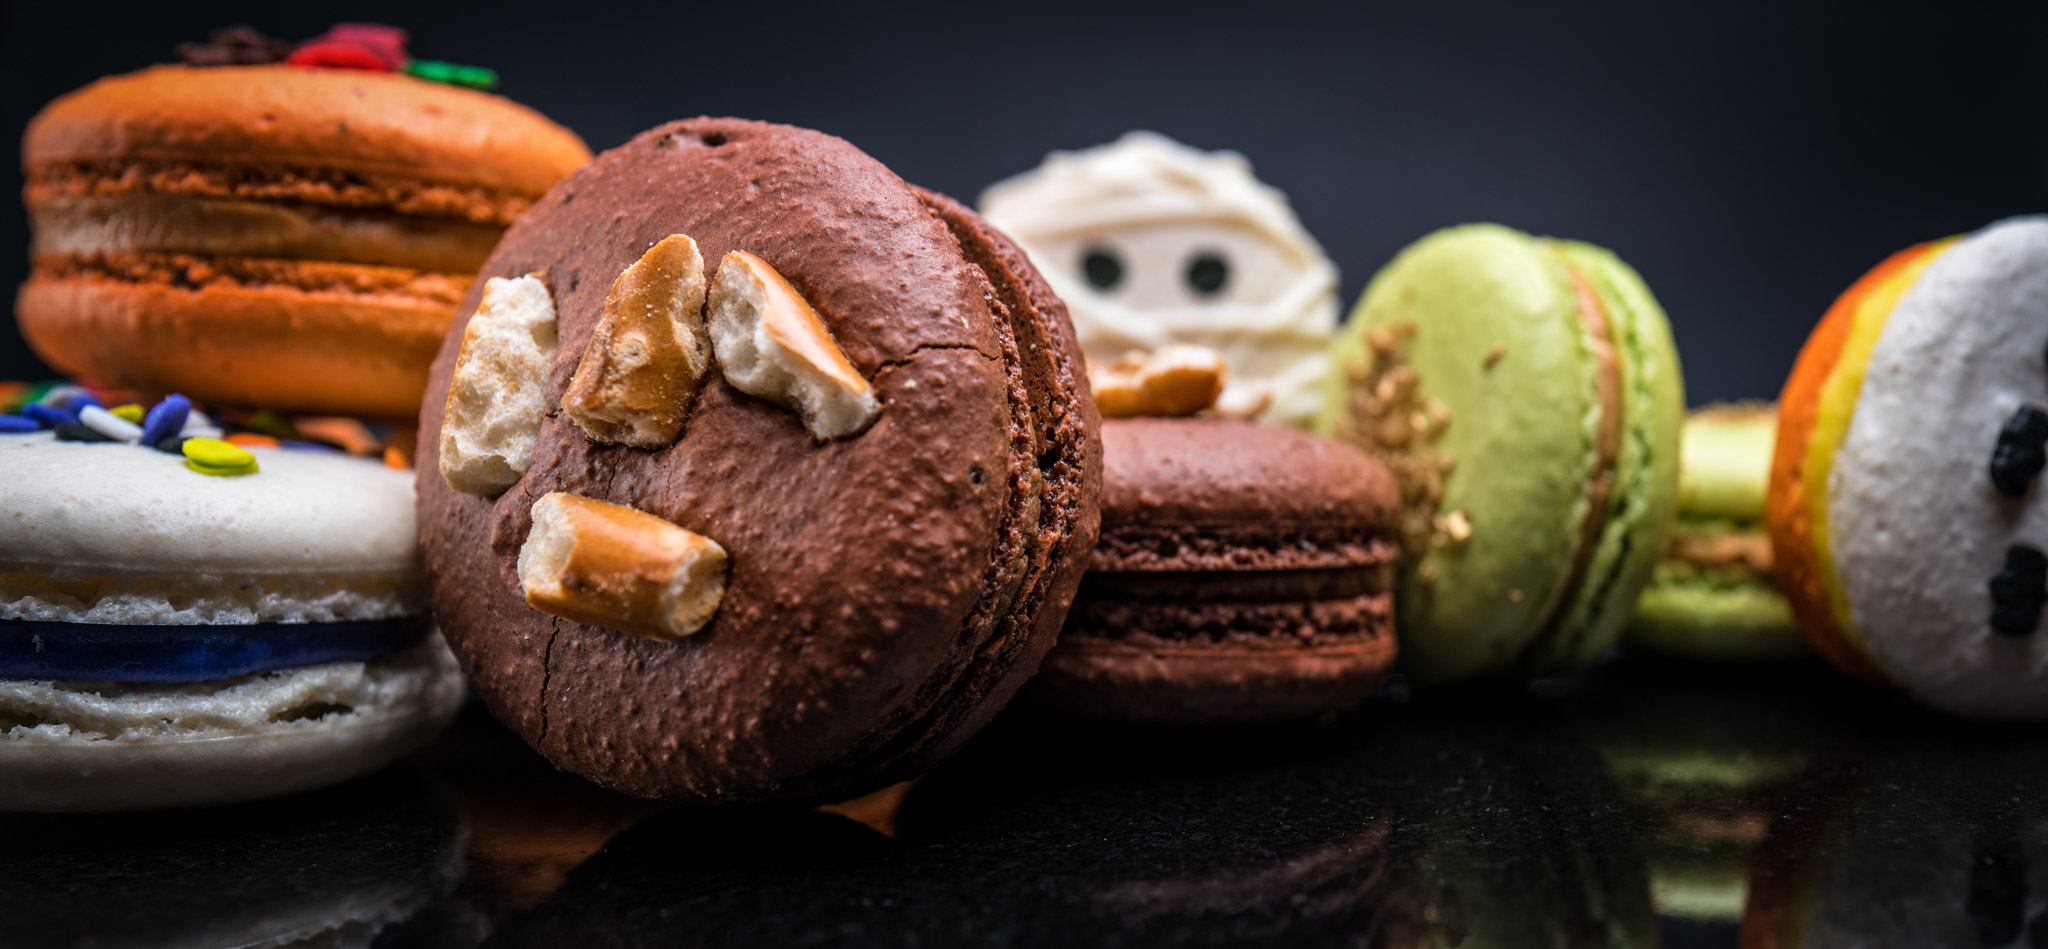 Savor's October Flavors of the Month